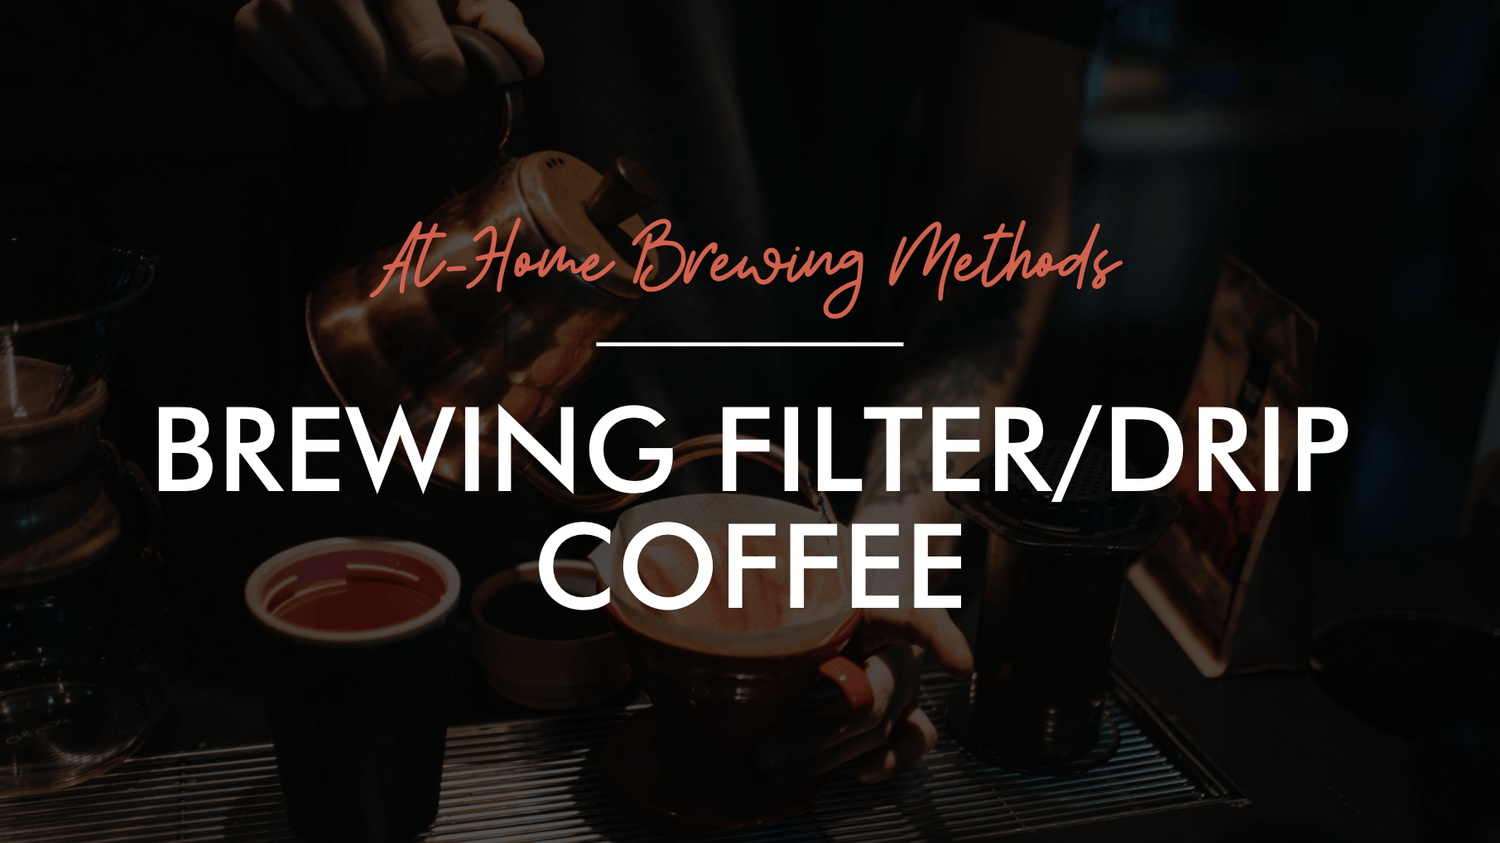 Home Brewing Methods: Filter/Drip